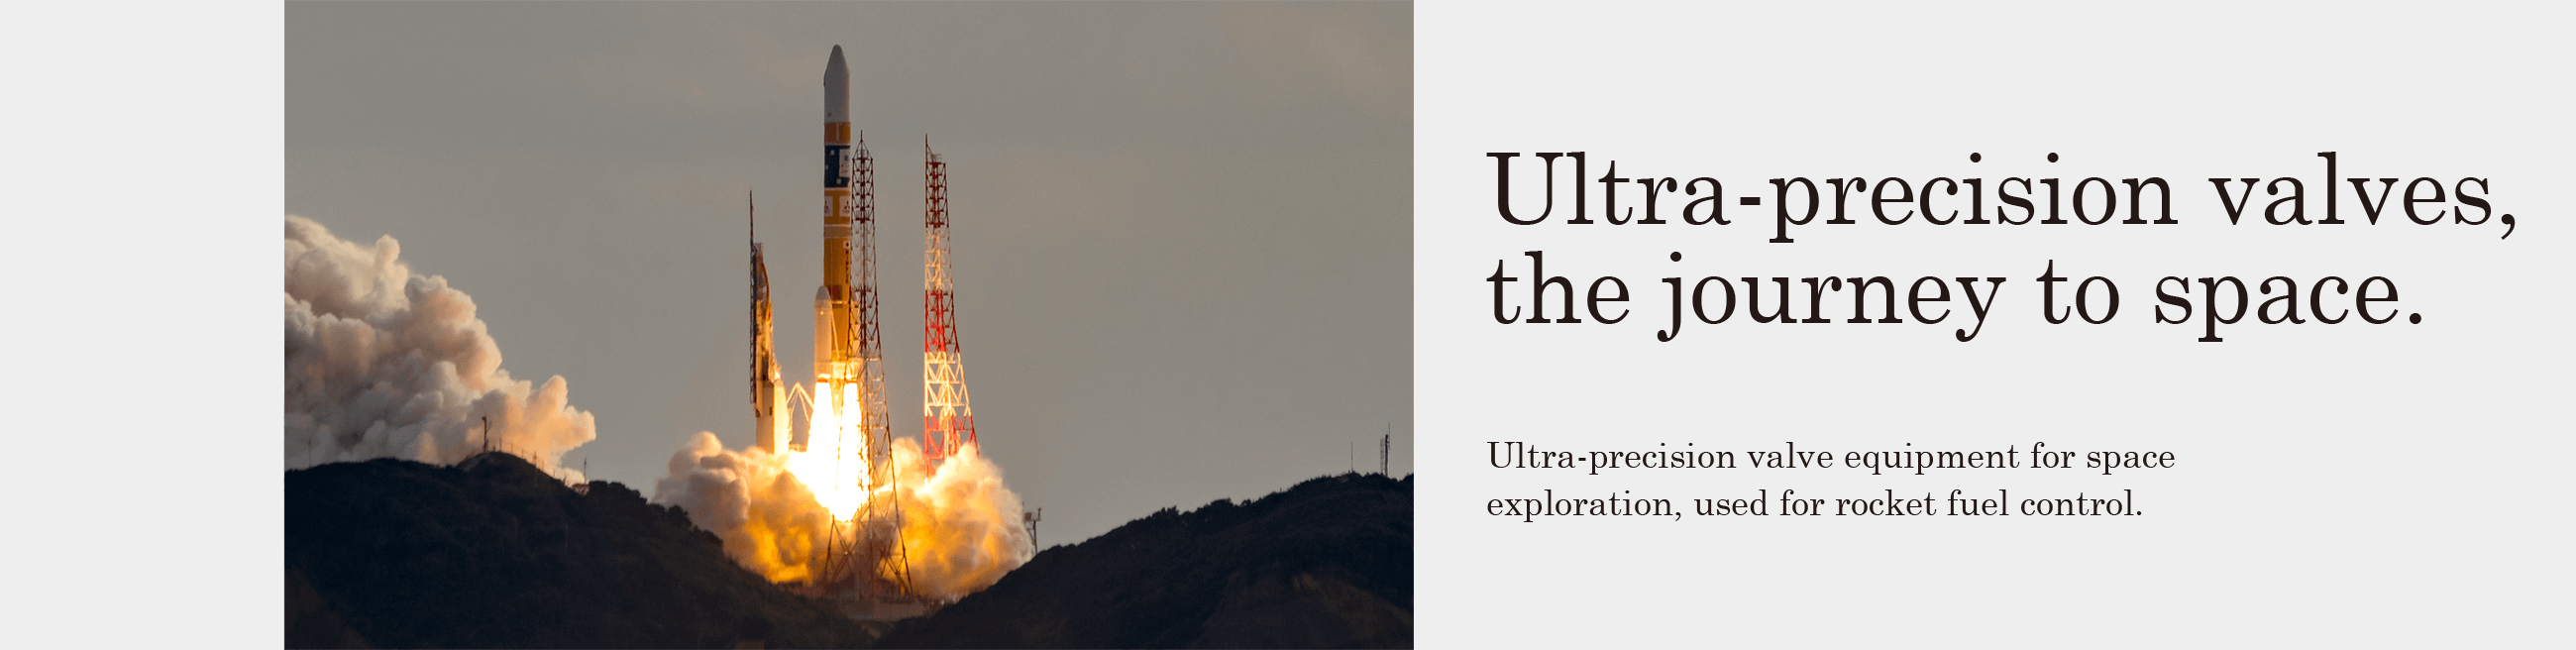 Ultra-precision valves, the journey to space.